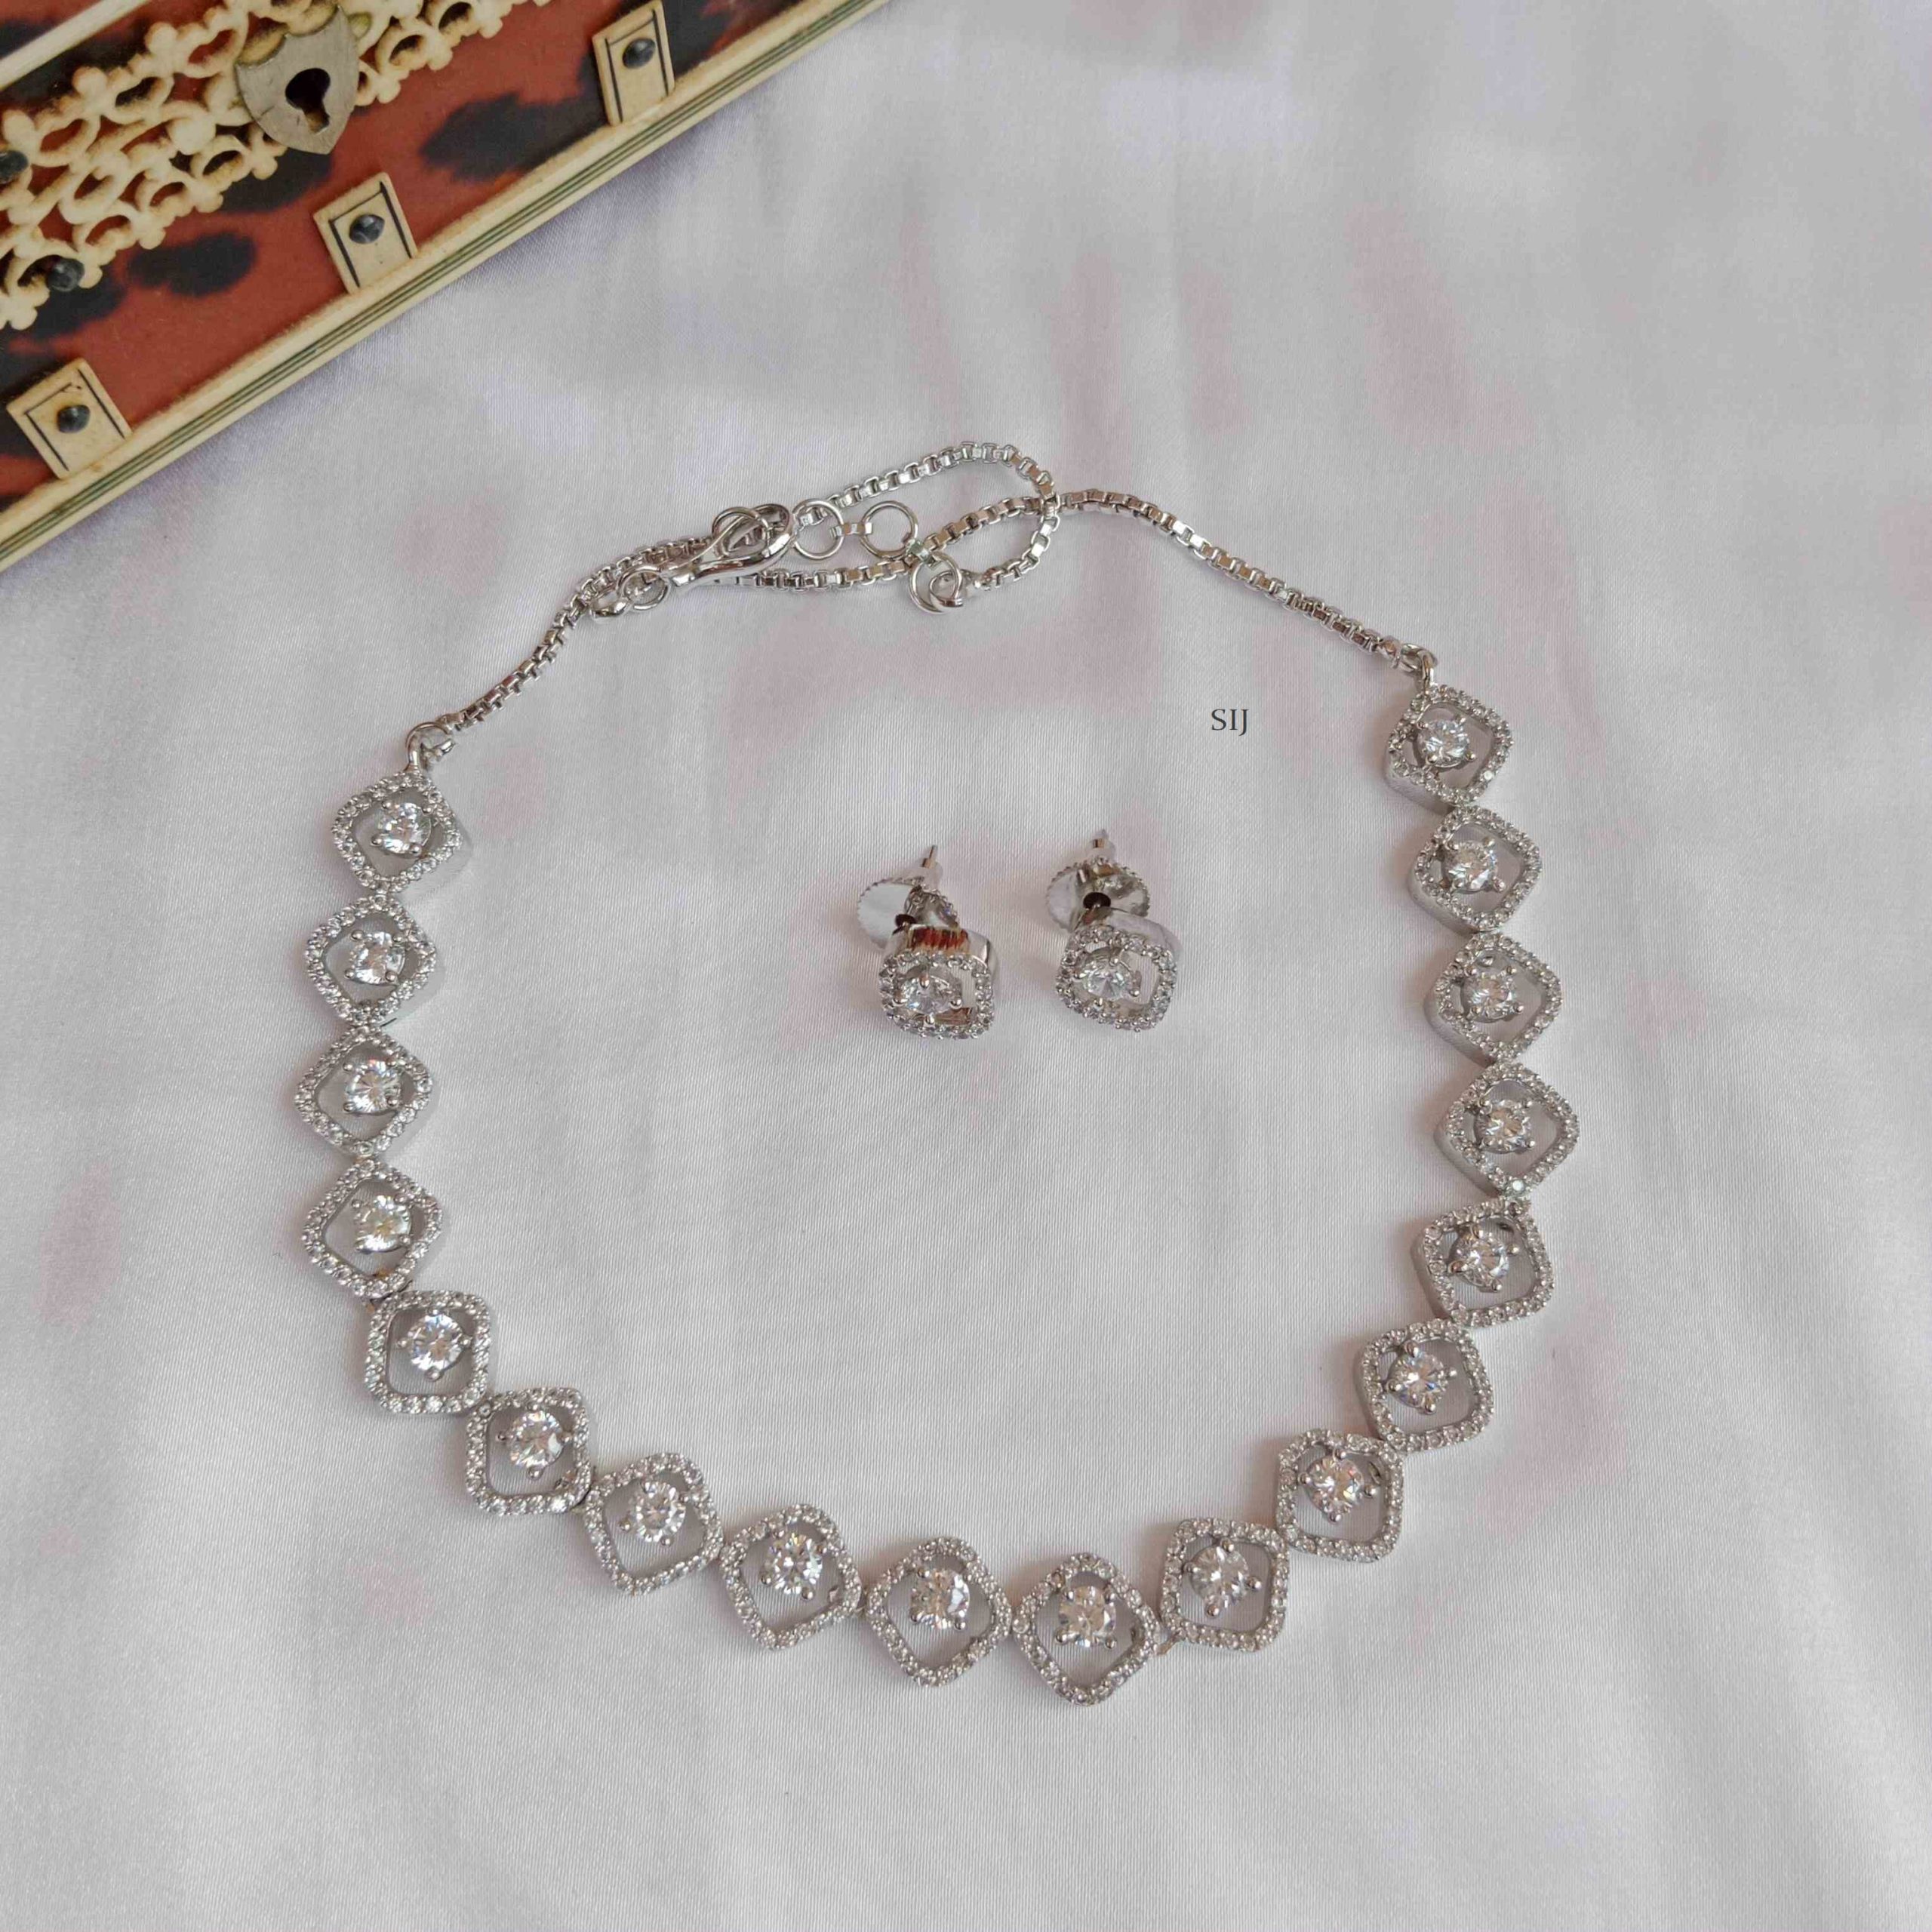 Traditional AD and Solitaire Stones Necklace